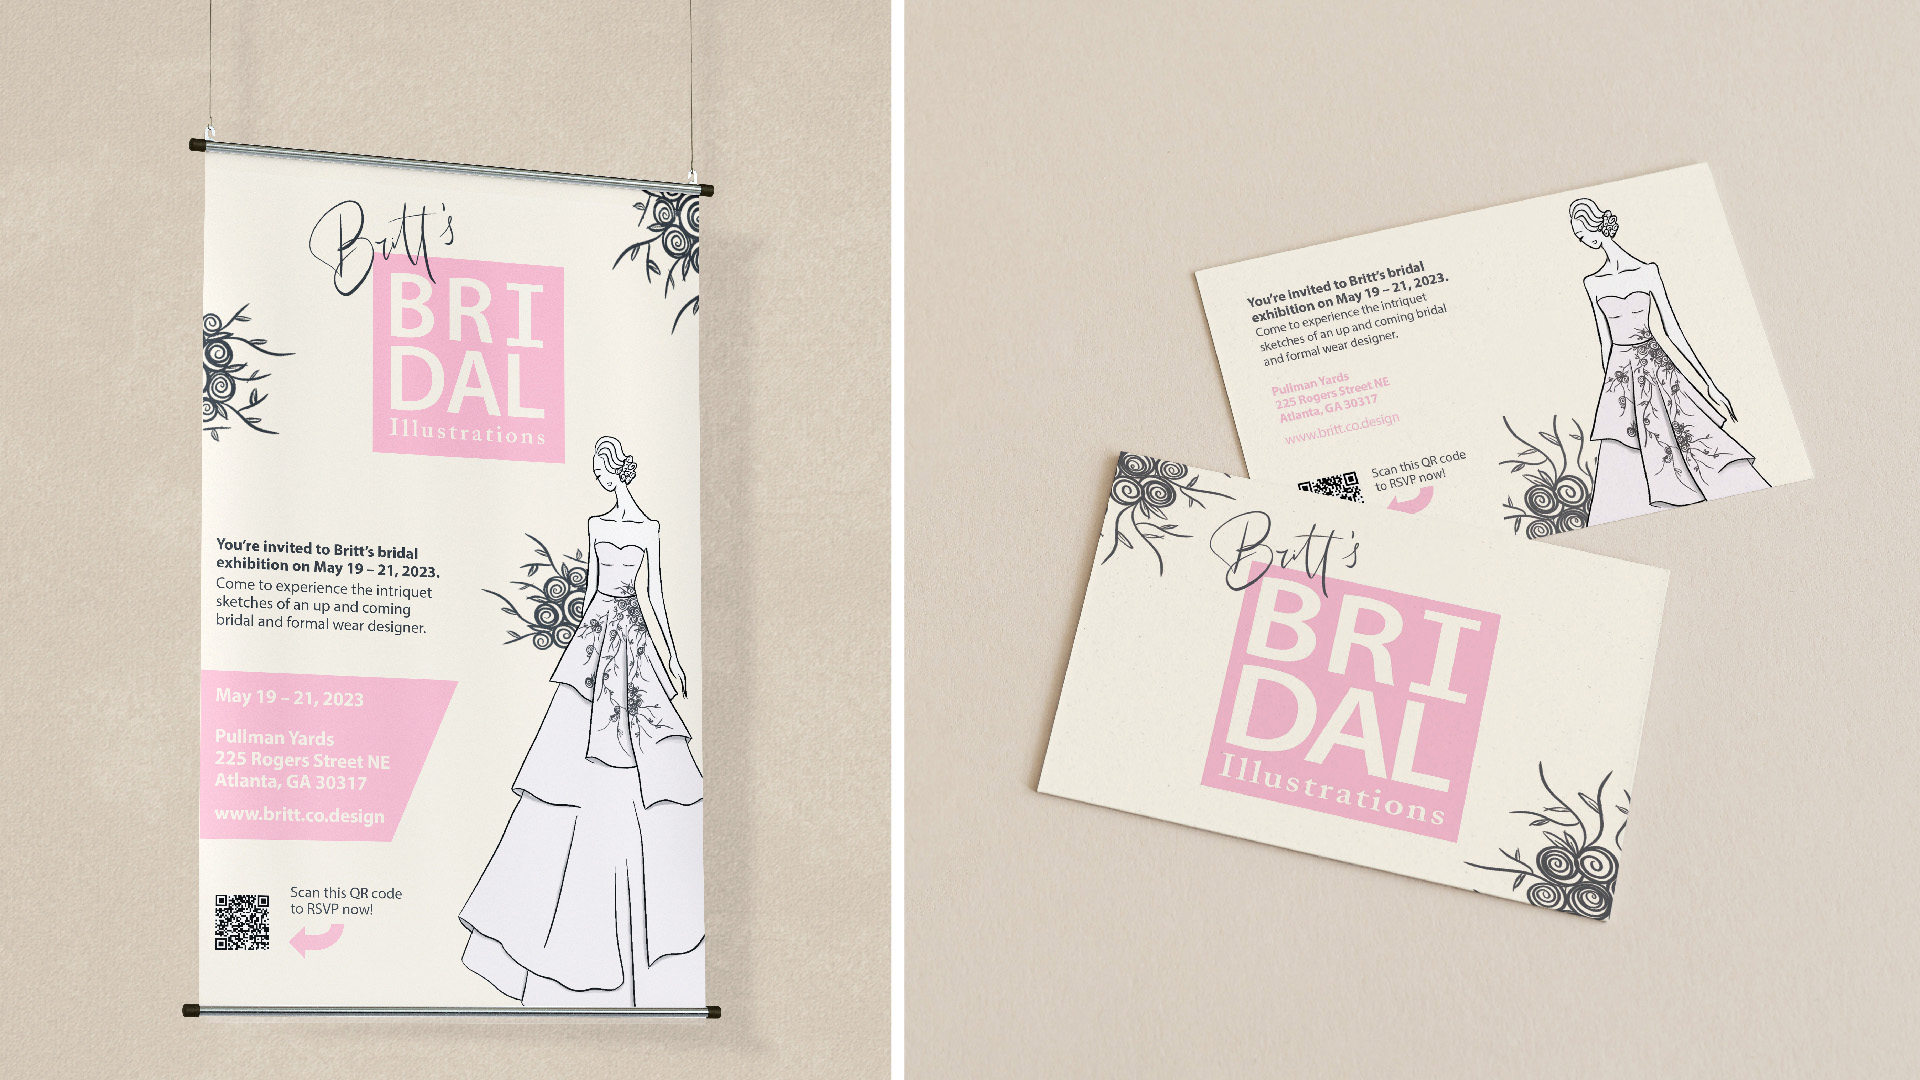 “Britt’s Bridal” / “Britt’s Bridal”, Poster and Postcards, Adobe InDesign and Illustrator, 11x17 poster and 5 x 7 postcard printed, 2022.